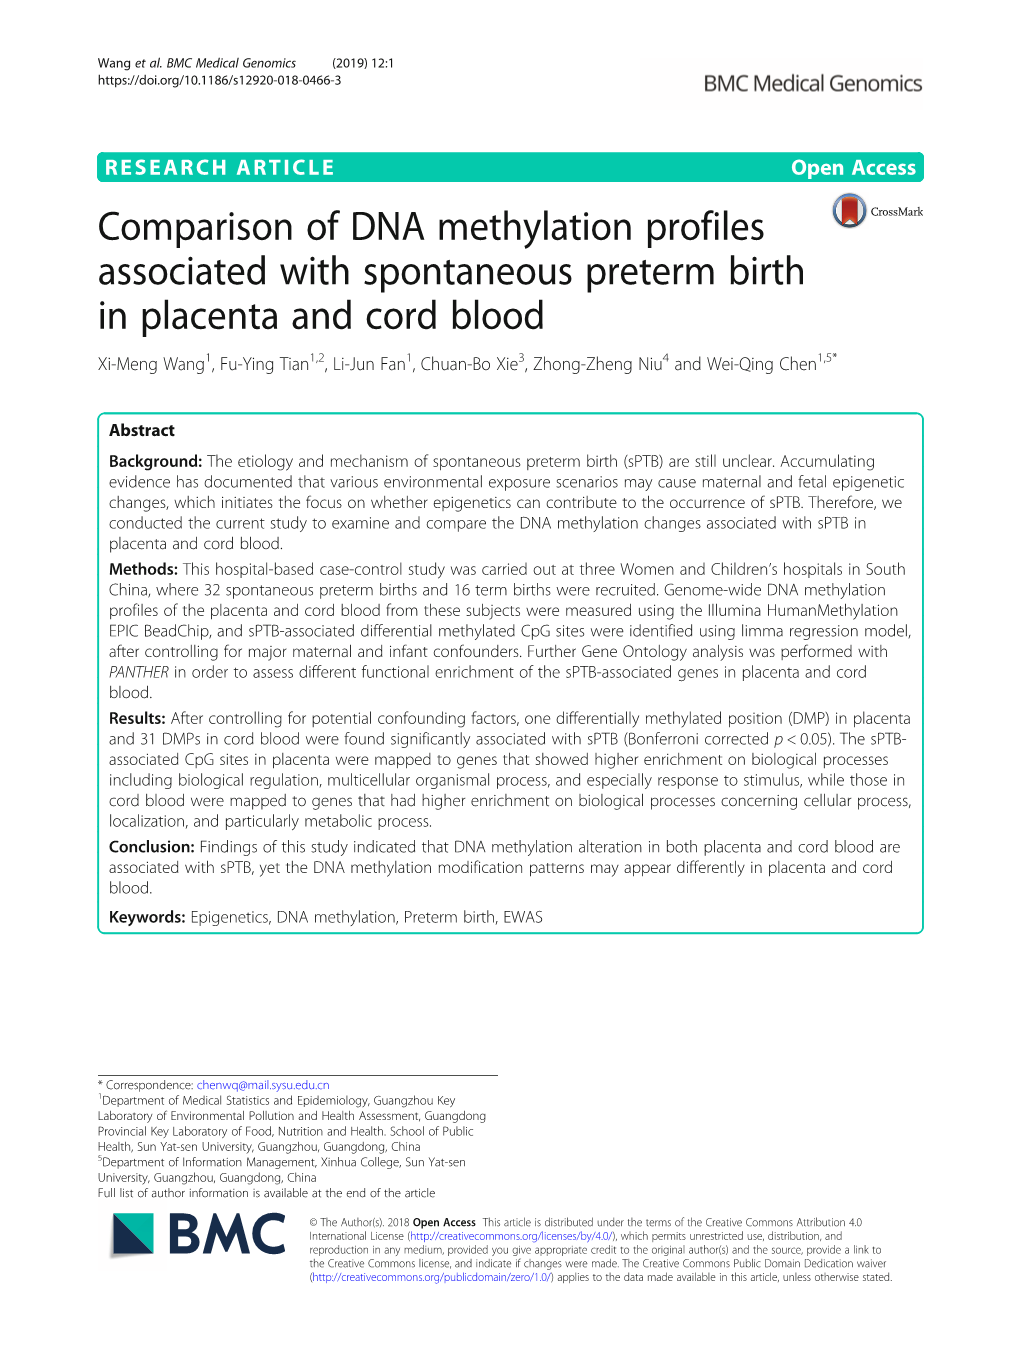 Comparison of DNA Methylation Profiles Associated With